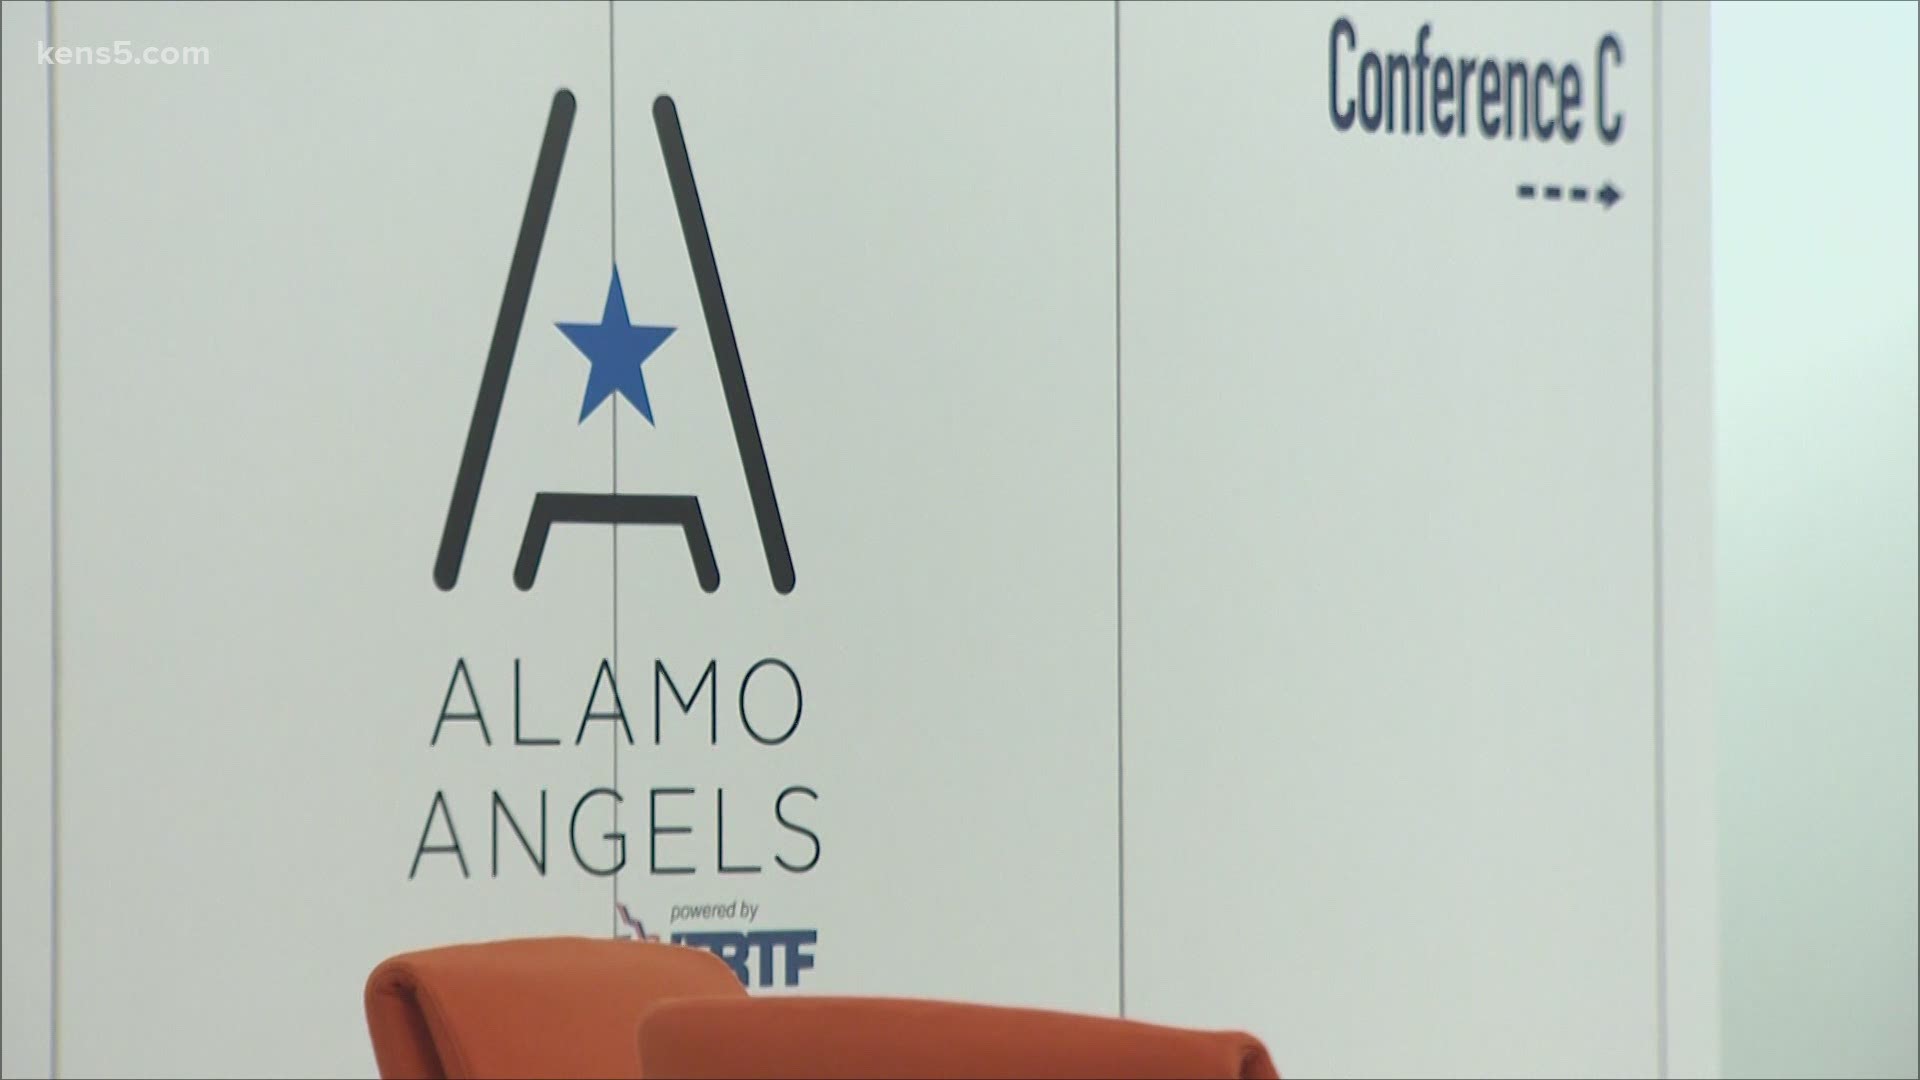 A San Antonio organization connects start-ups – many of them local – with angel investors and support to jumpstart bright ideas.